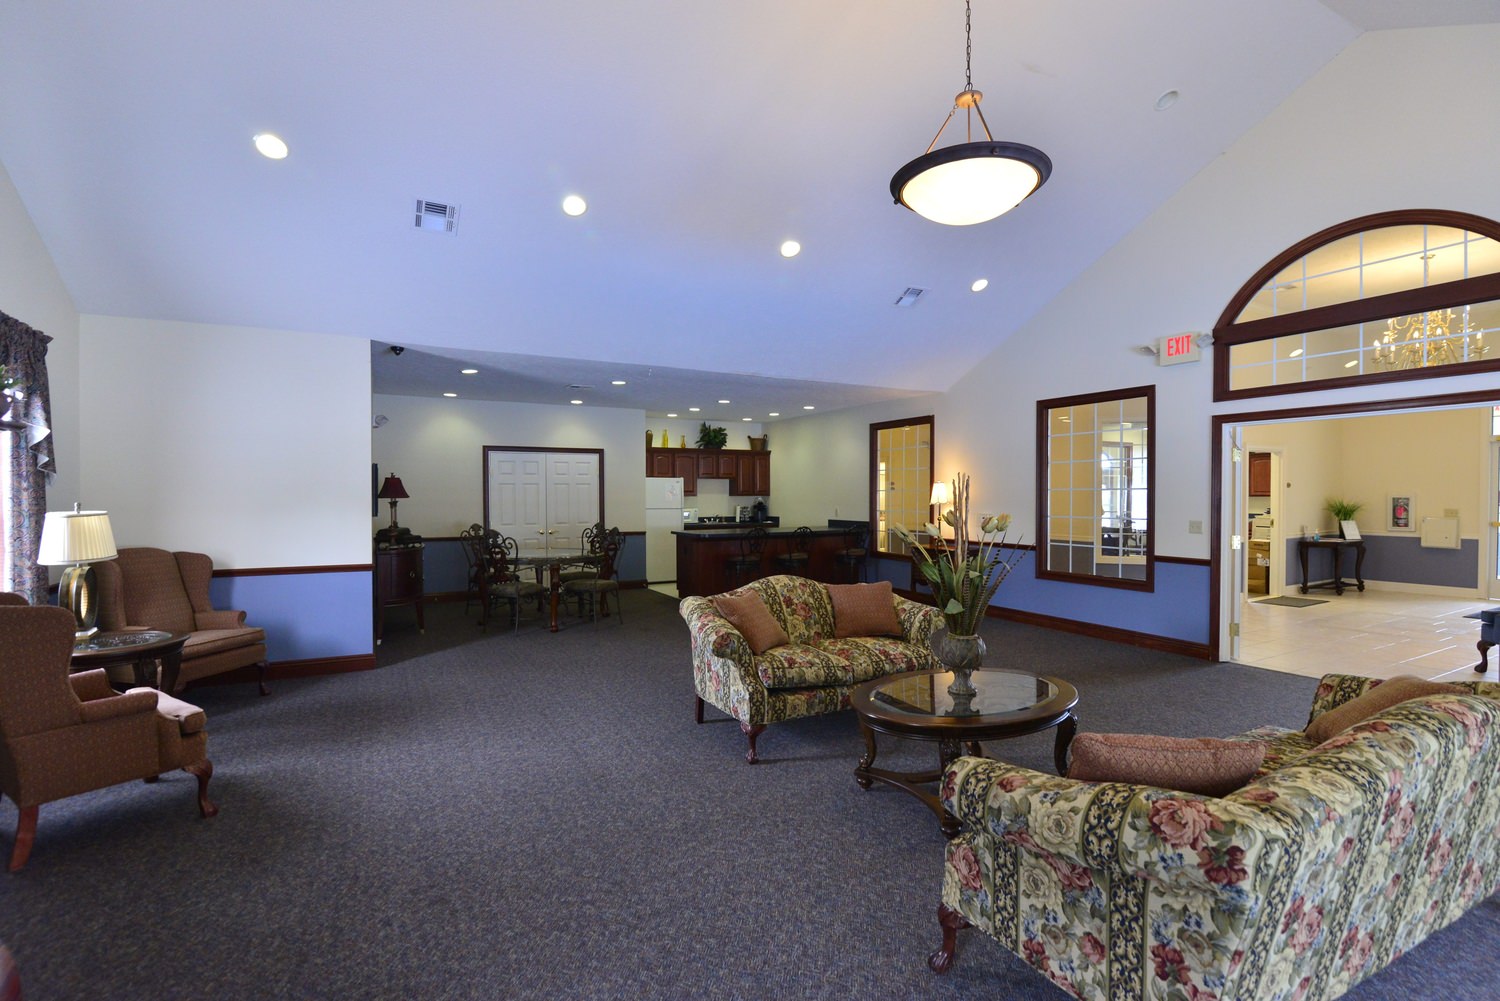 A view of a lobby in a hotel room that has a small bar in the background area of it.